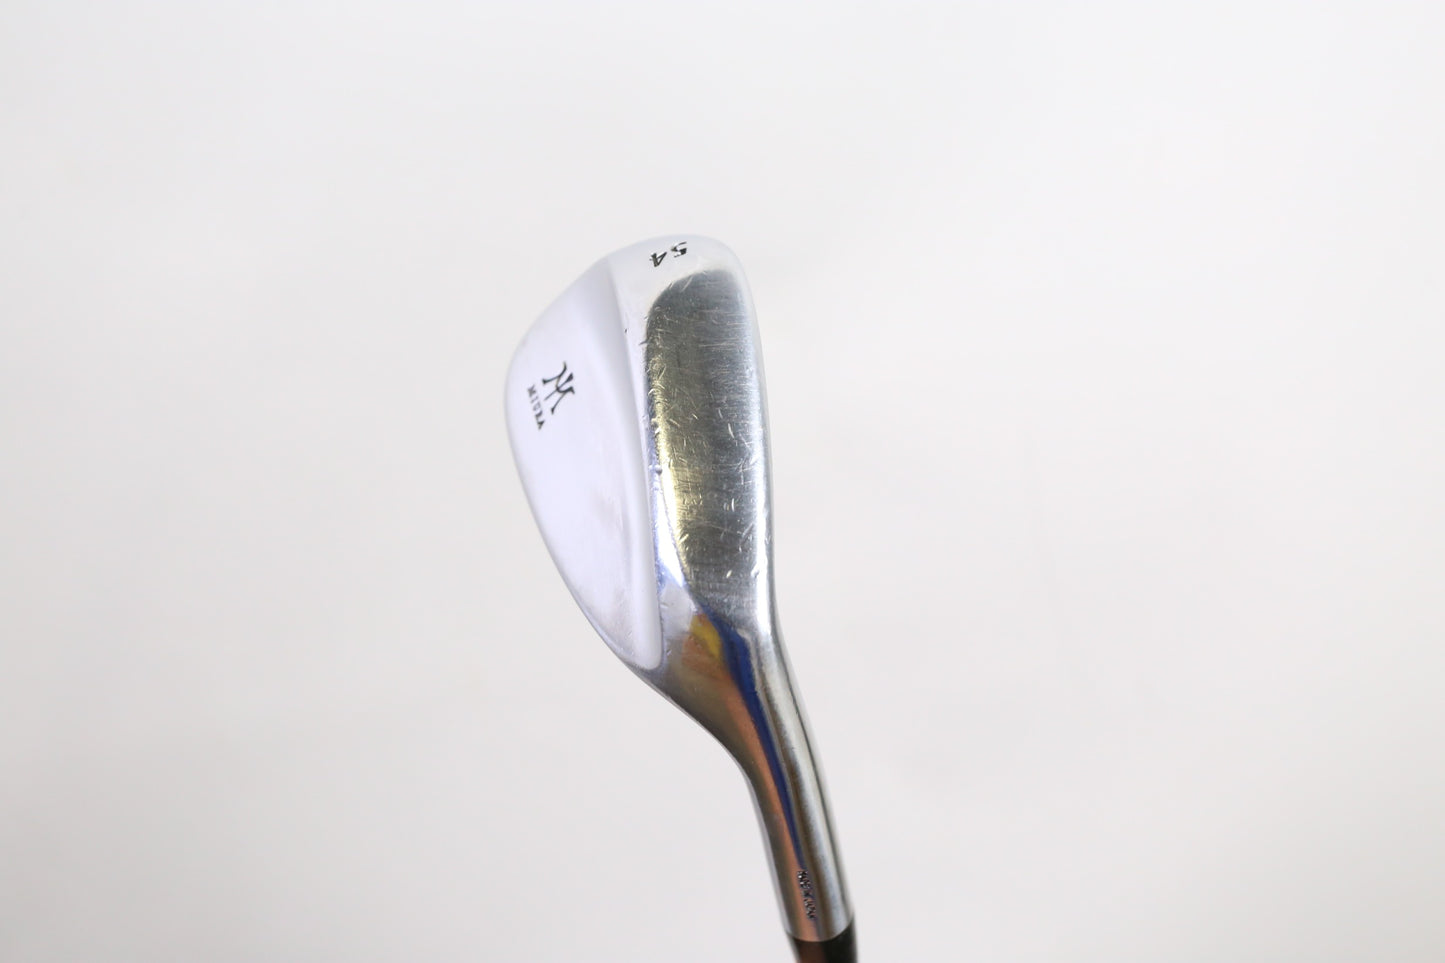 Used Miura Tour Series Sand Wedge - Right-Handed - 54 Degrees - Regular Flex